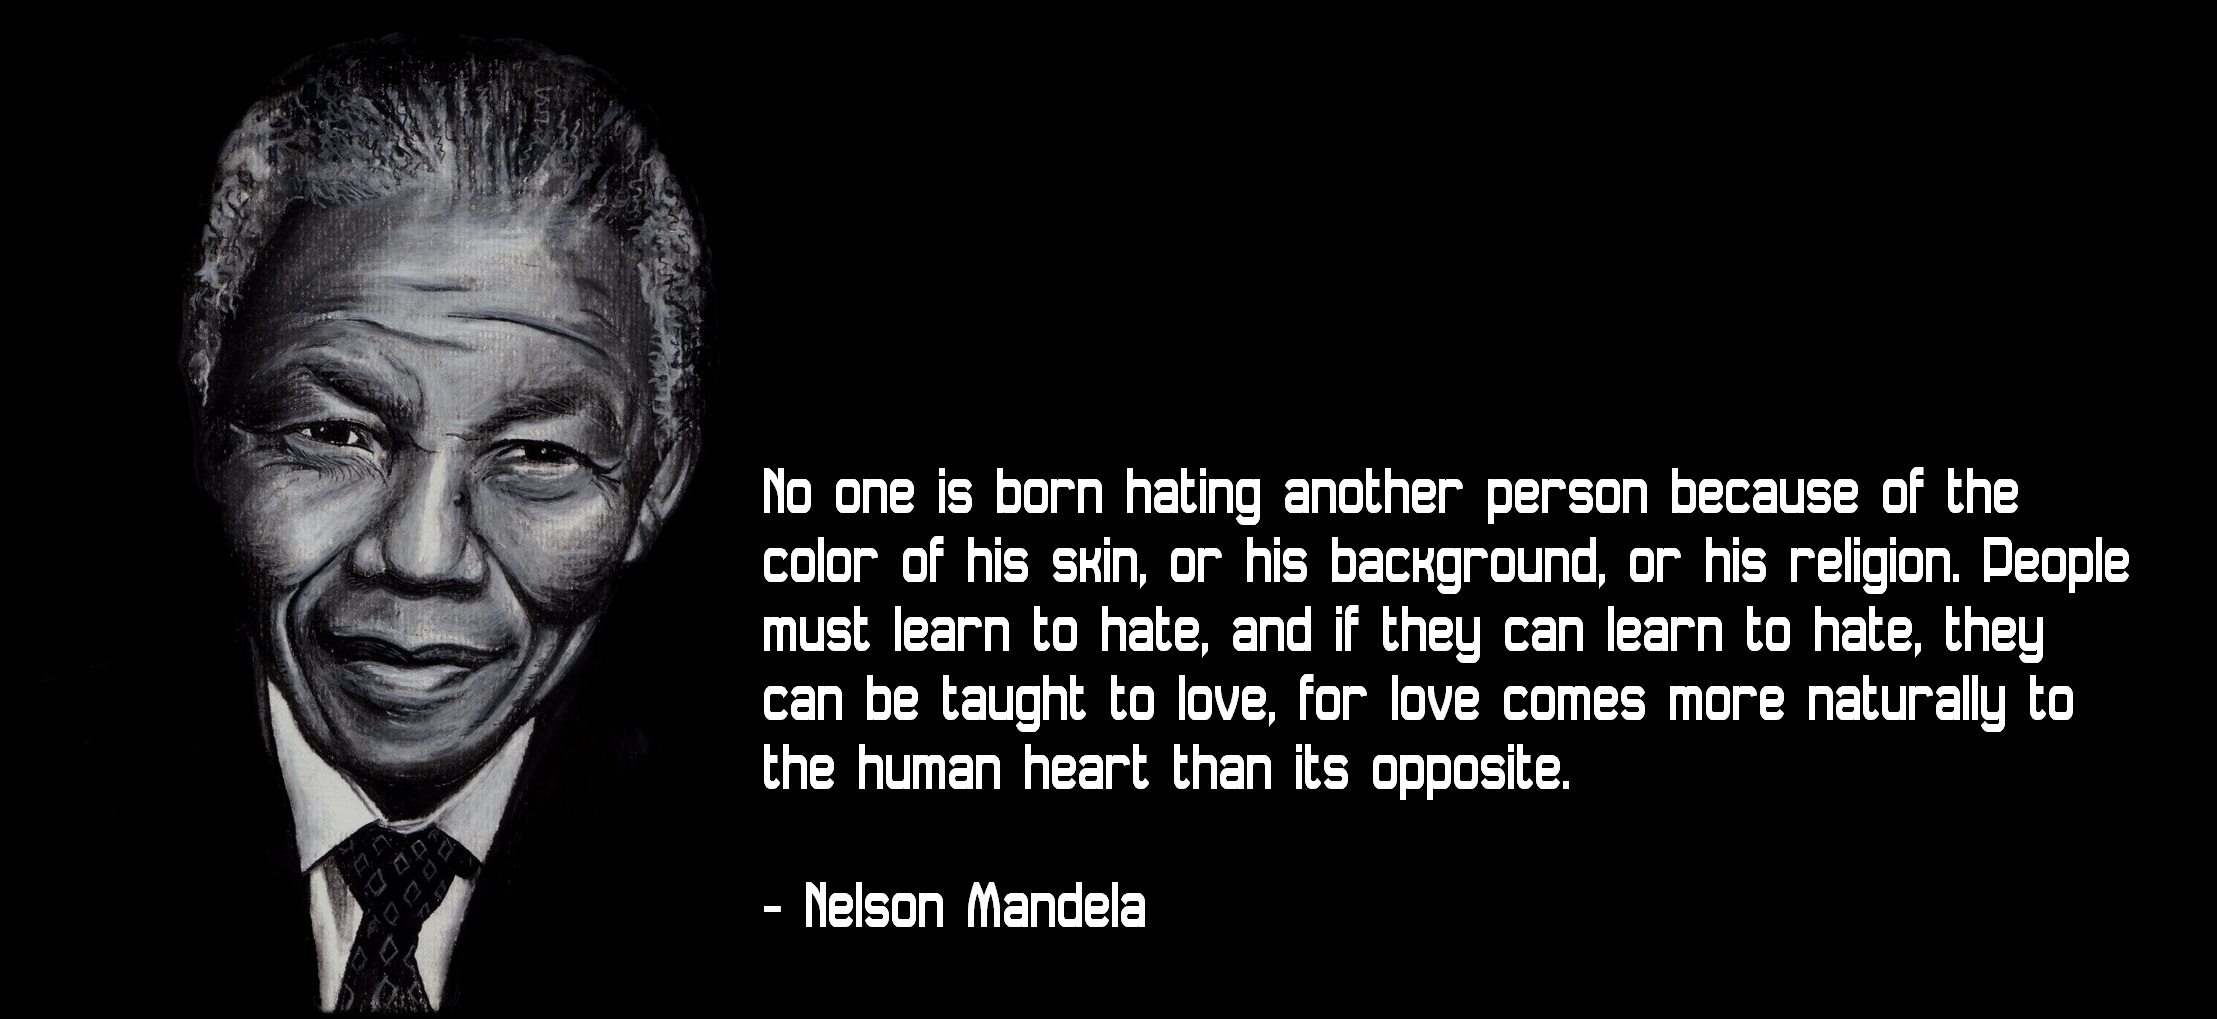 Inspirational HD Quote from Nelson Mandela - High Definition, High  Resolution HD Wallpapers : High Definition, High Resolution HD Wallpapers